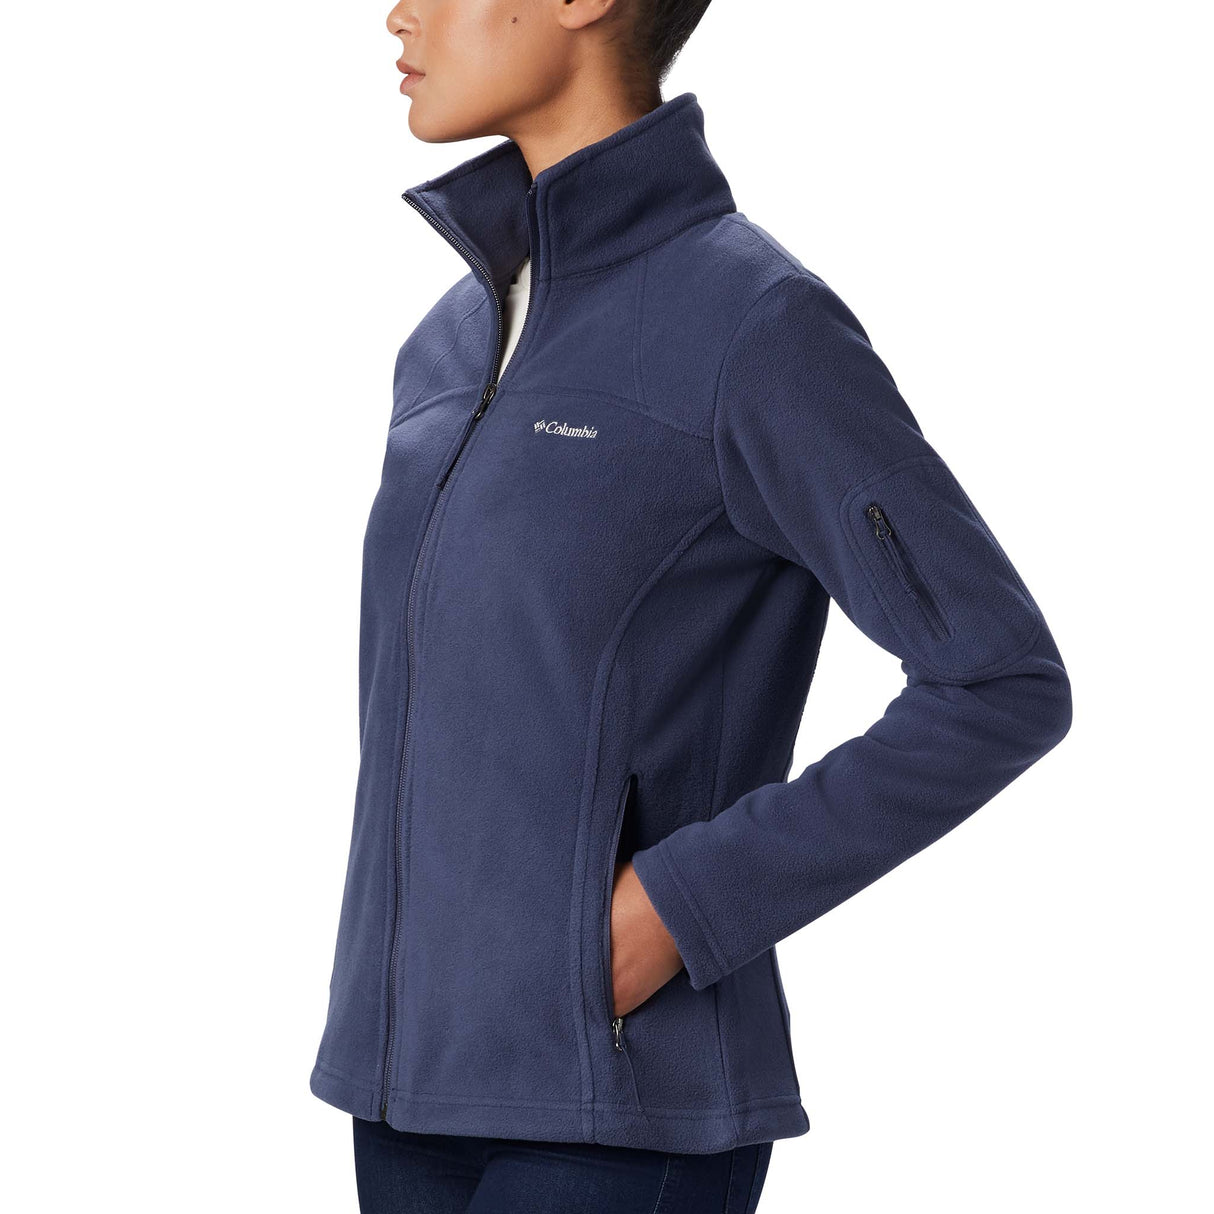 Veste polaire Columbia Fast Trek II Full Zip Nocturnal pour femme lateral